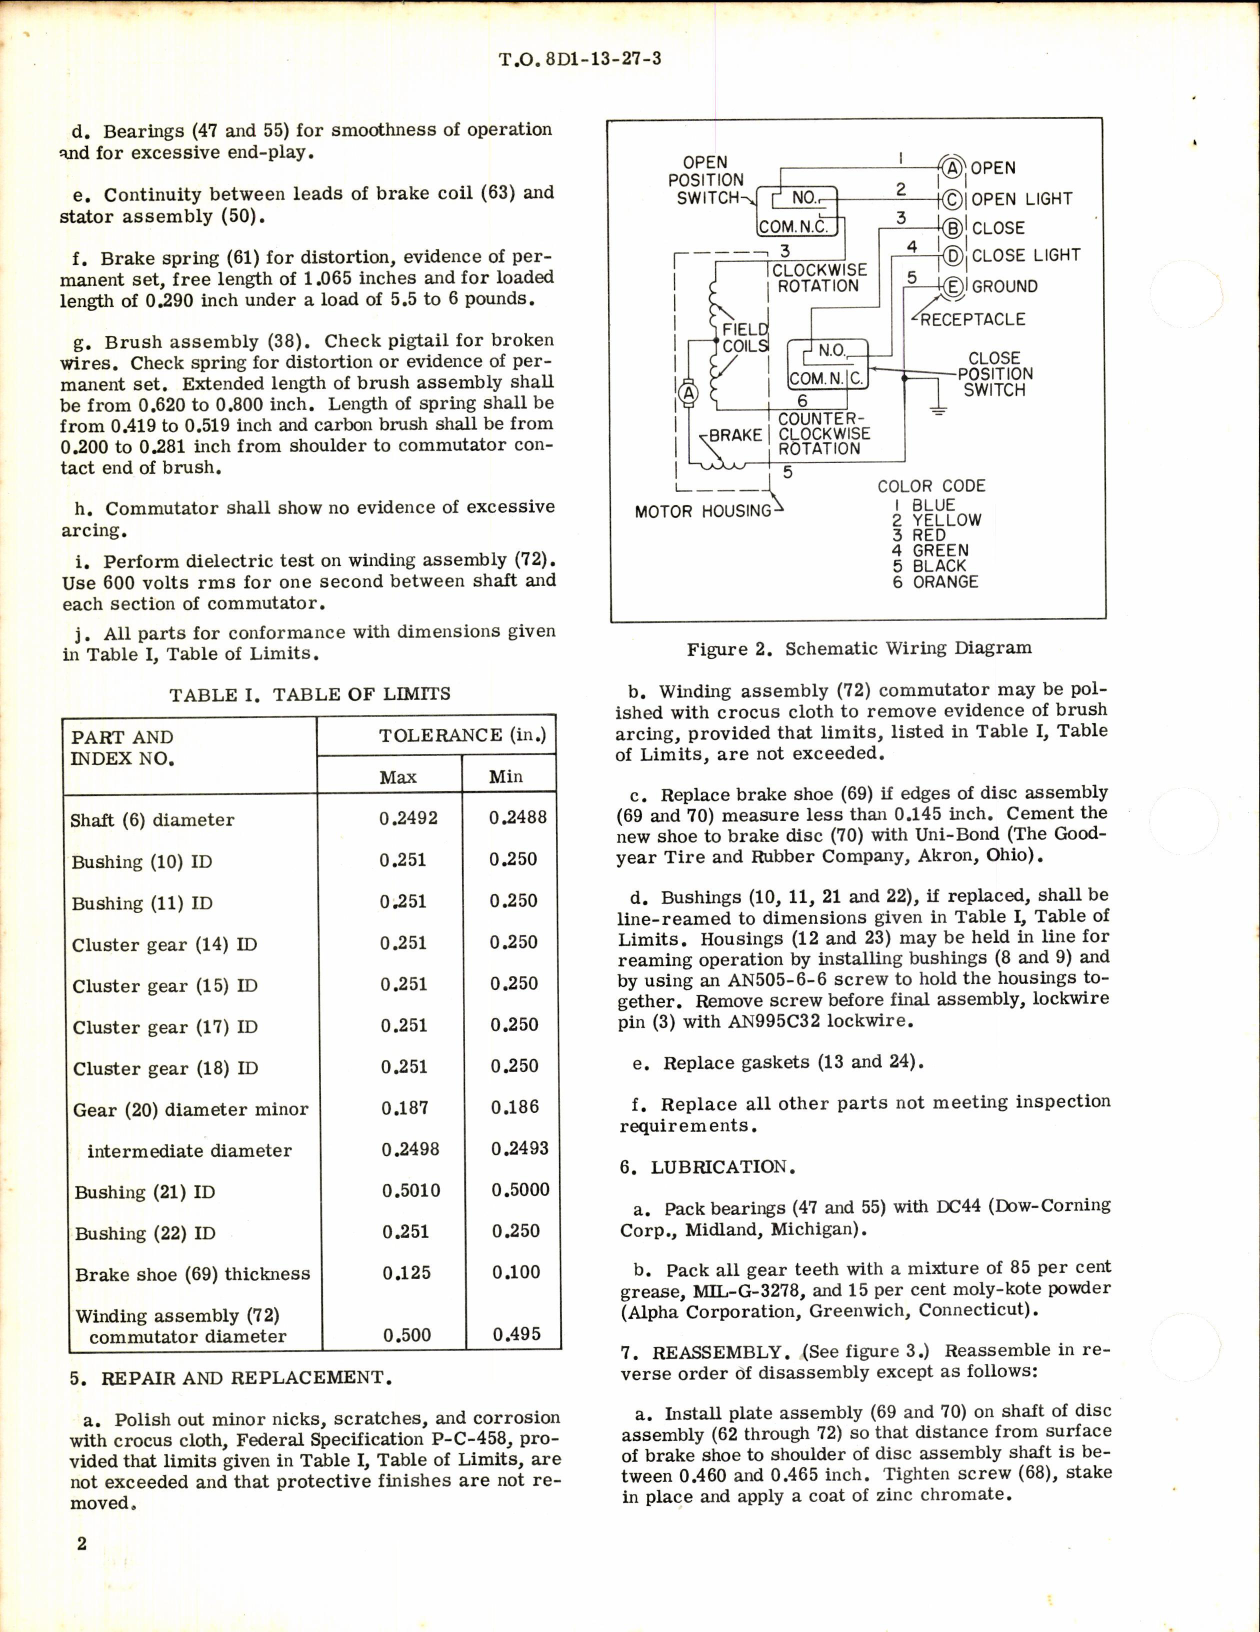 Sample page 2 from AirCorps Library document: Overhaul Instructions with Parts Breakdown for Hot Air Shut-Off Valve Motor & Actuator Part No. 334522